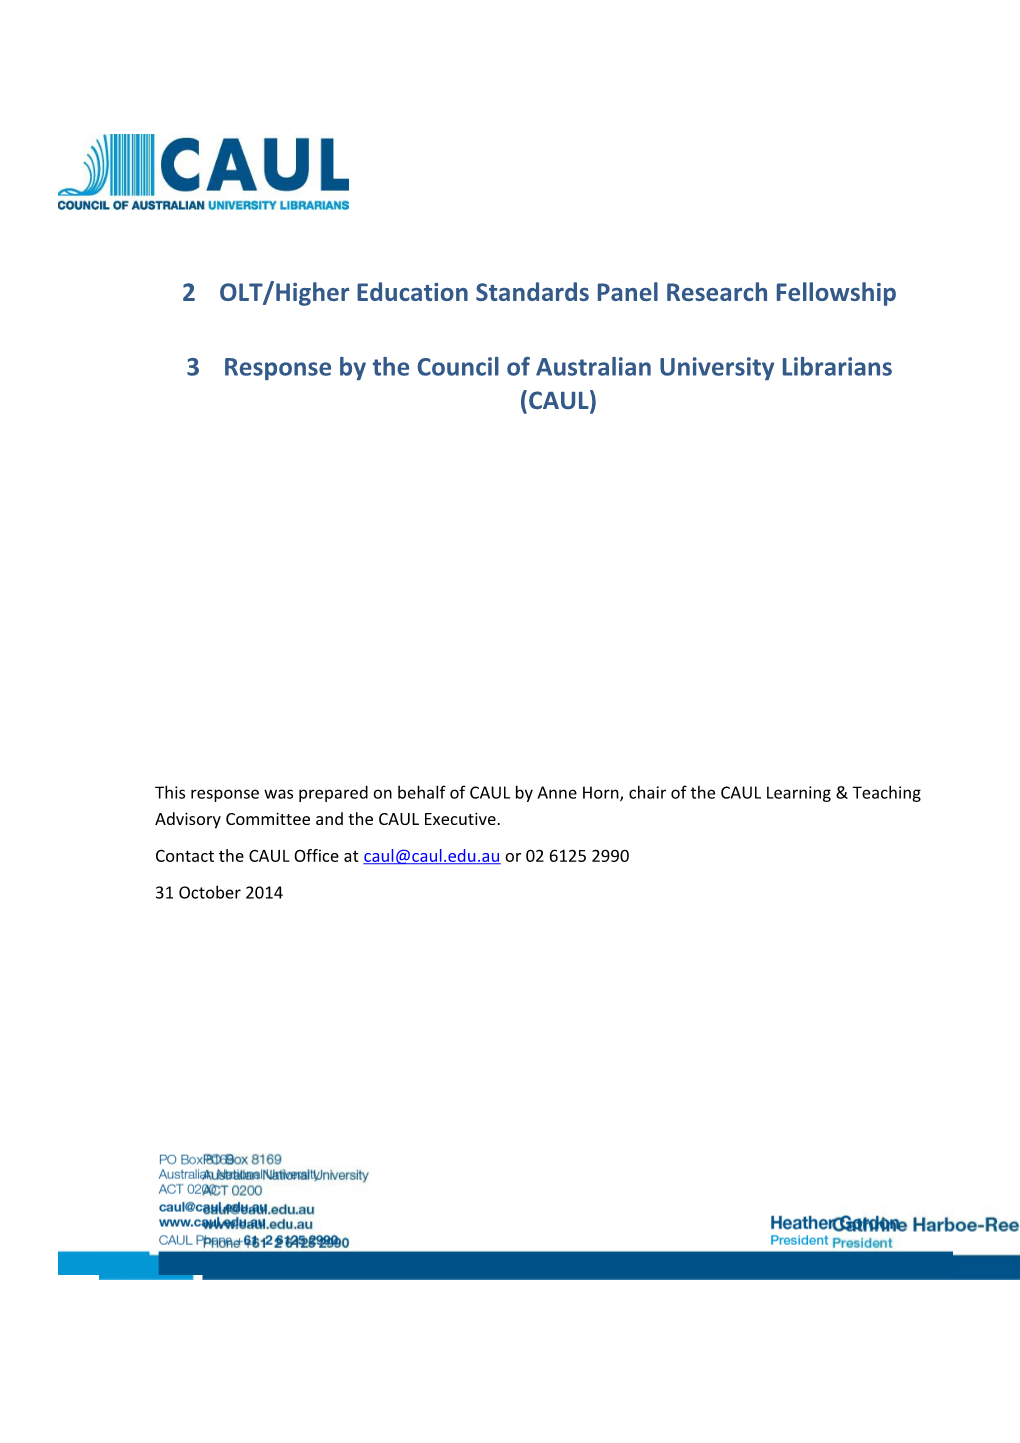 OLT/Higher Education Standards Panel Research Fellowship